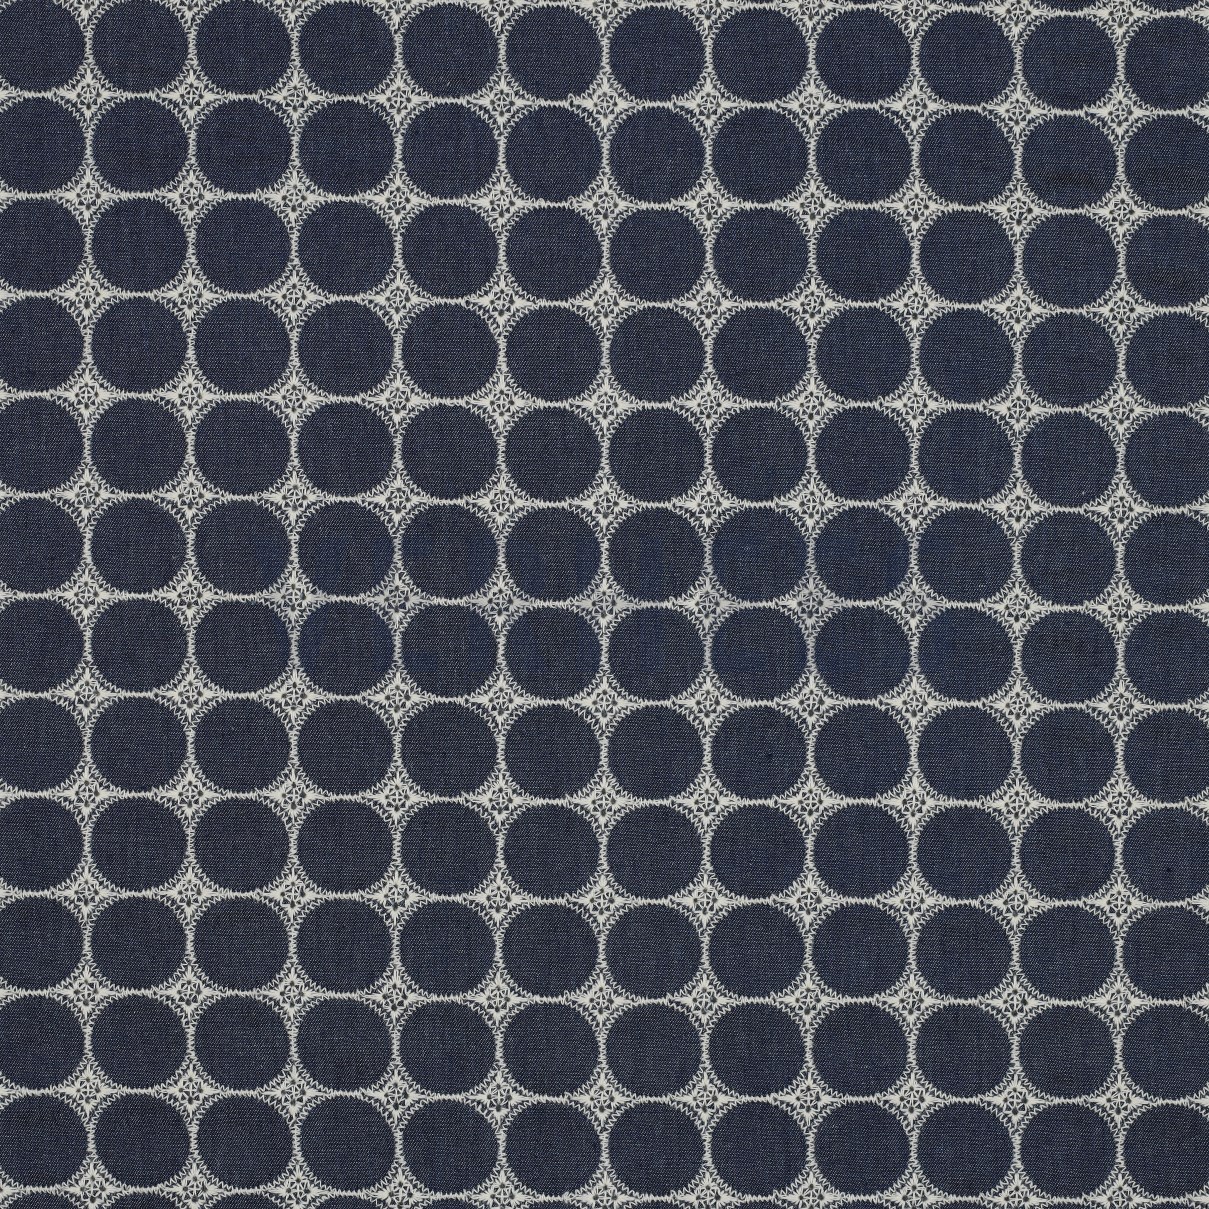 JEANS EMBROIDERY CIRCLES DARK BLUE (high resolution)